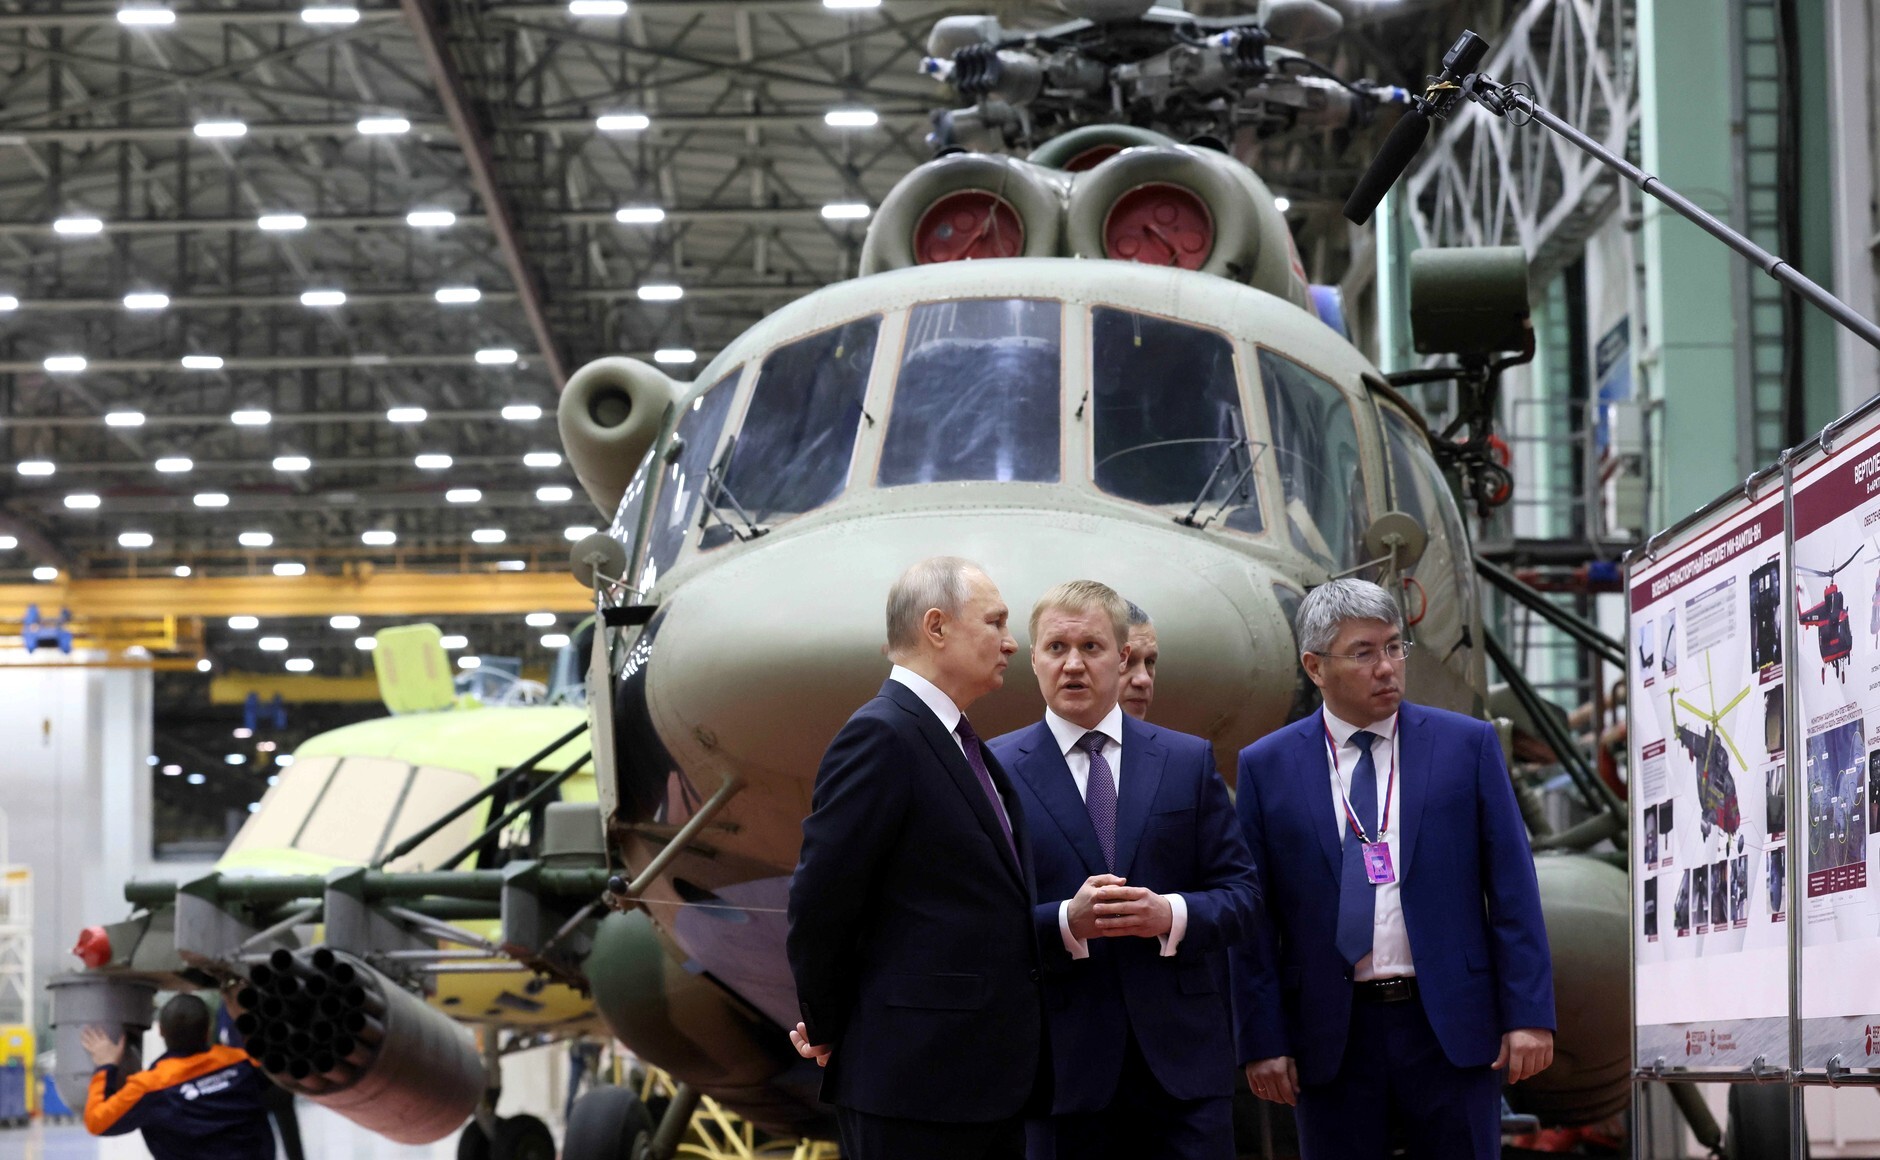 Did Russia really try to buy back military equipment its exported to other countries?